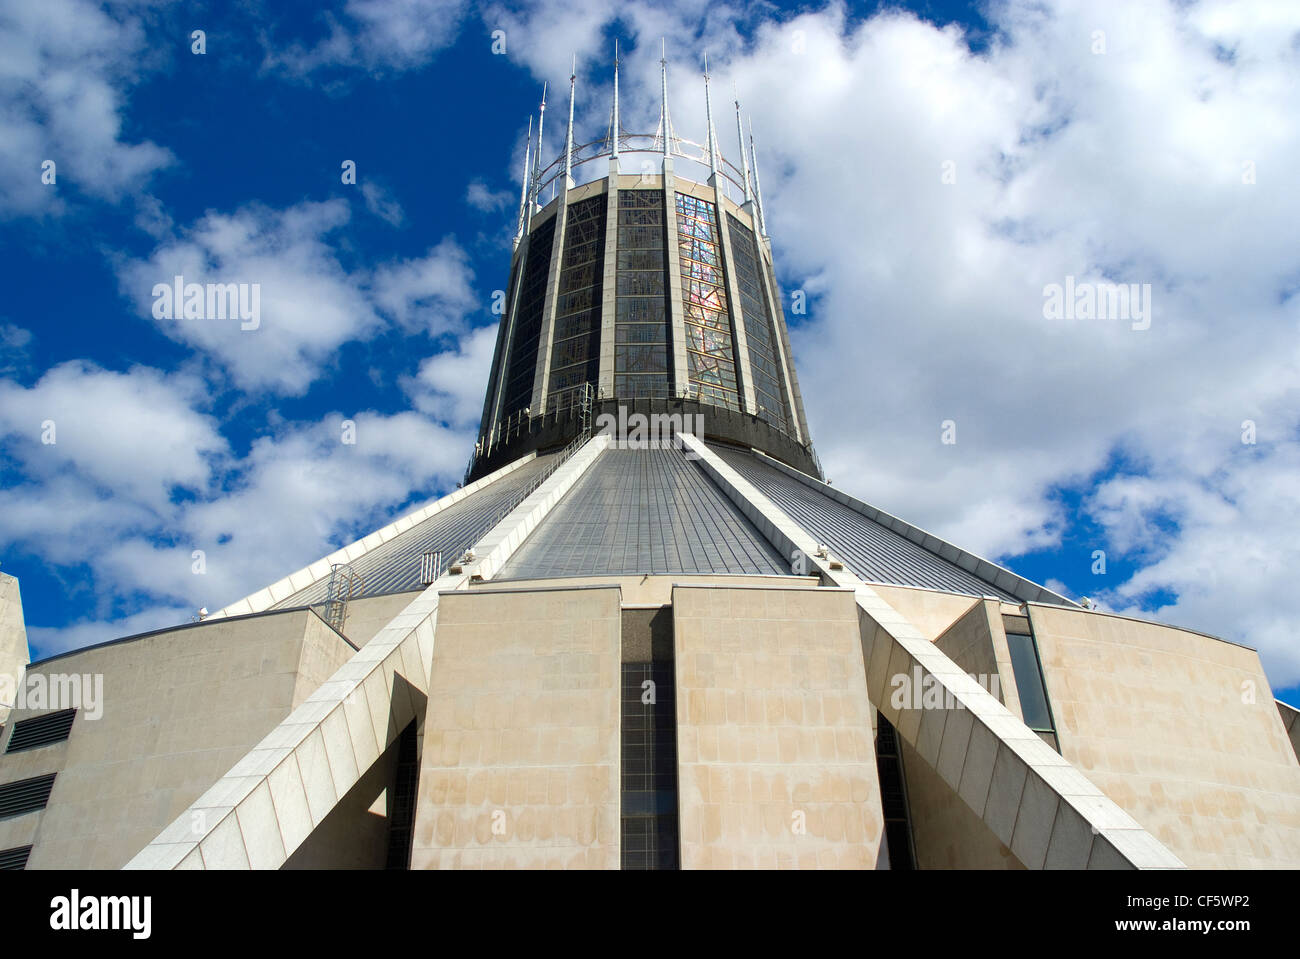 The exterior of Liverpool's Roman Catholic Metropolitan Cathedral dedicated to Christ the King. Stock Photo